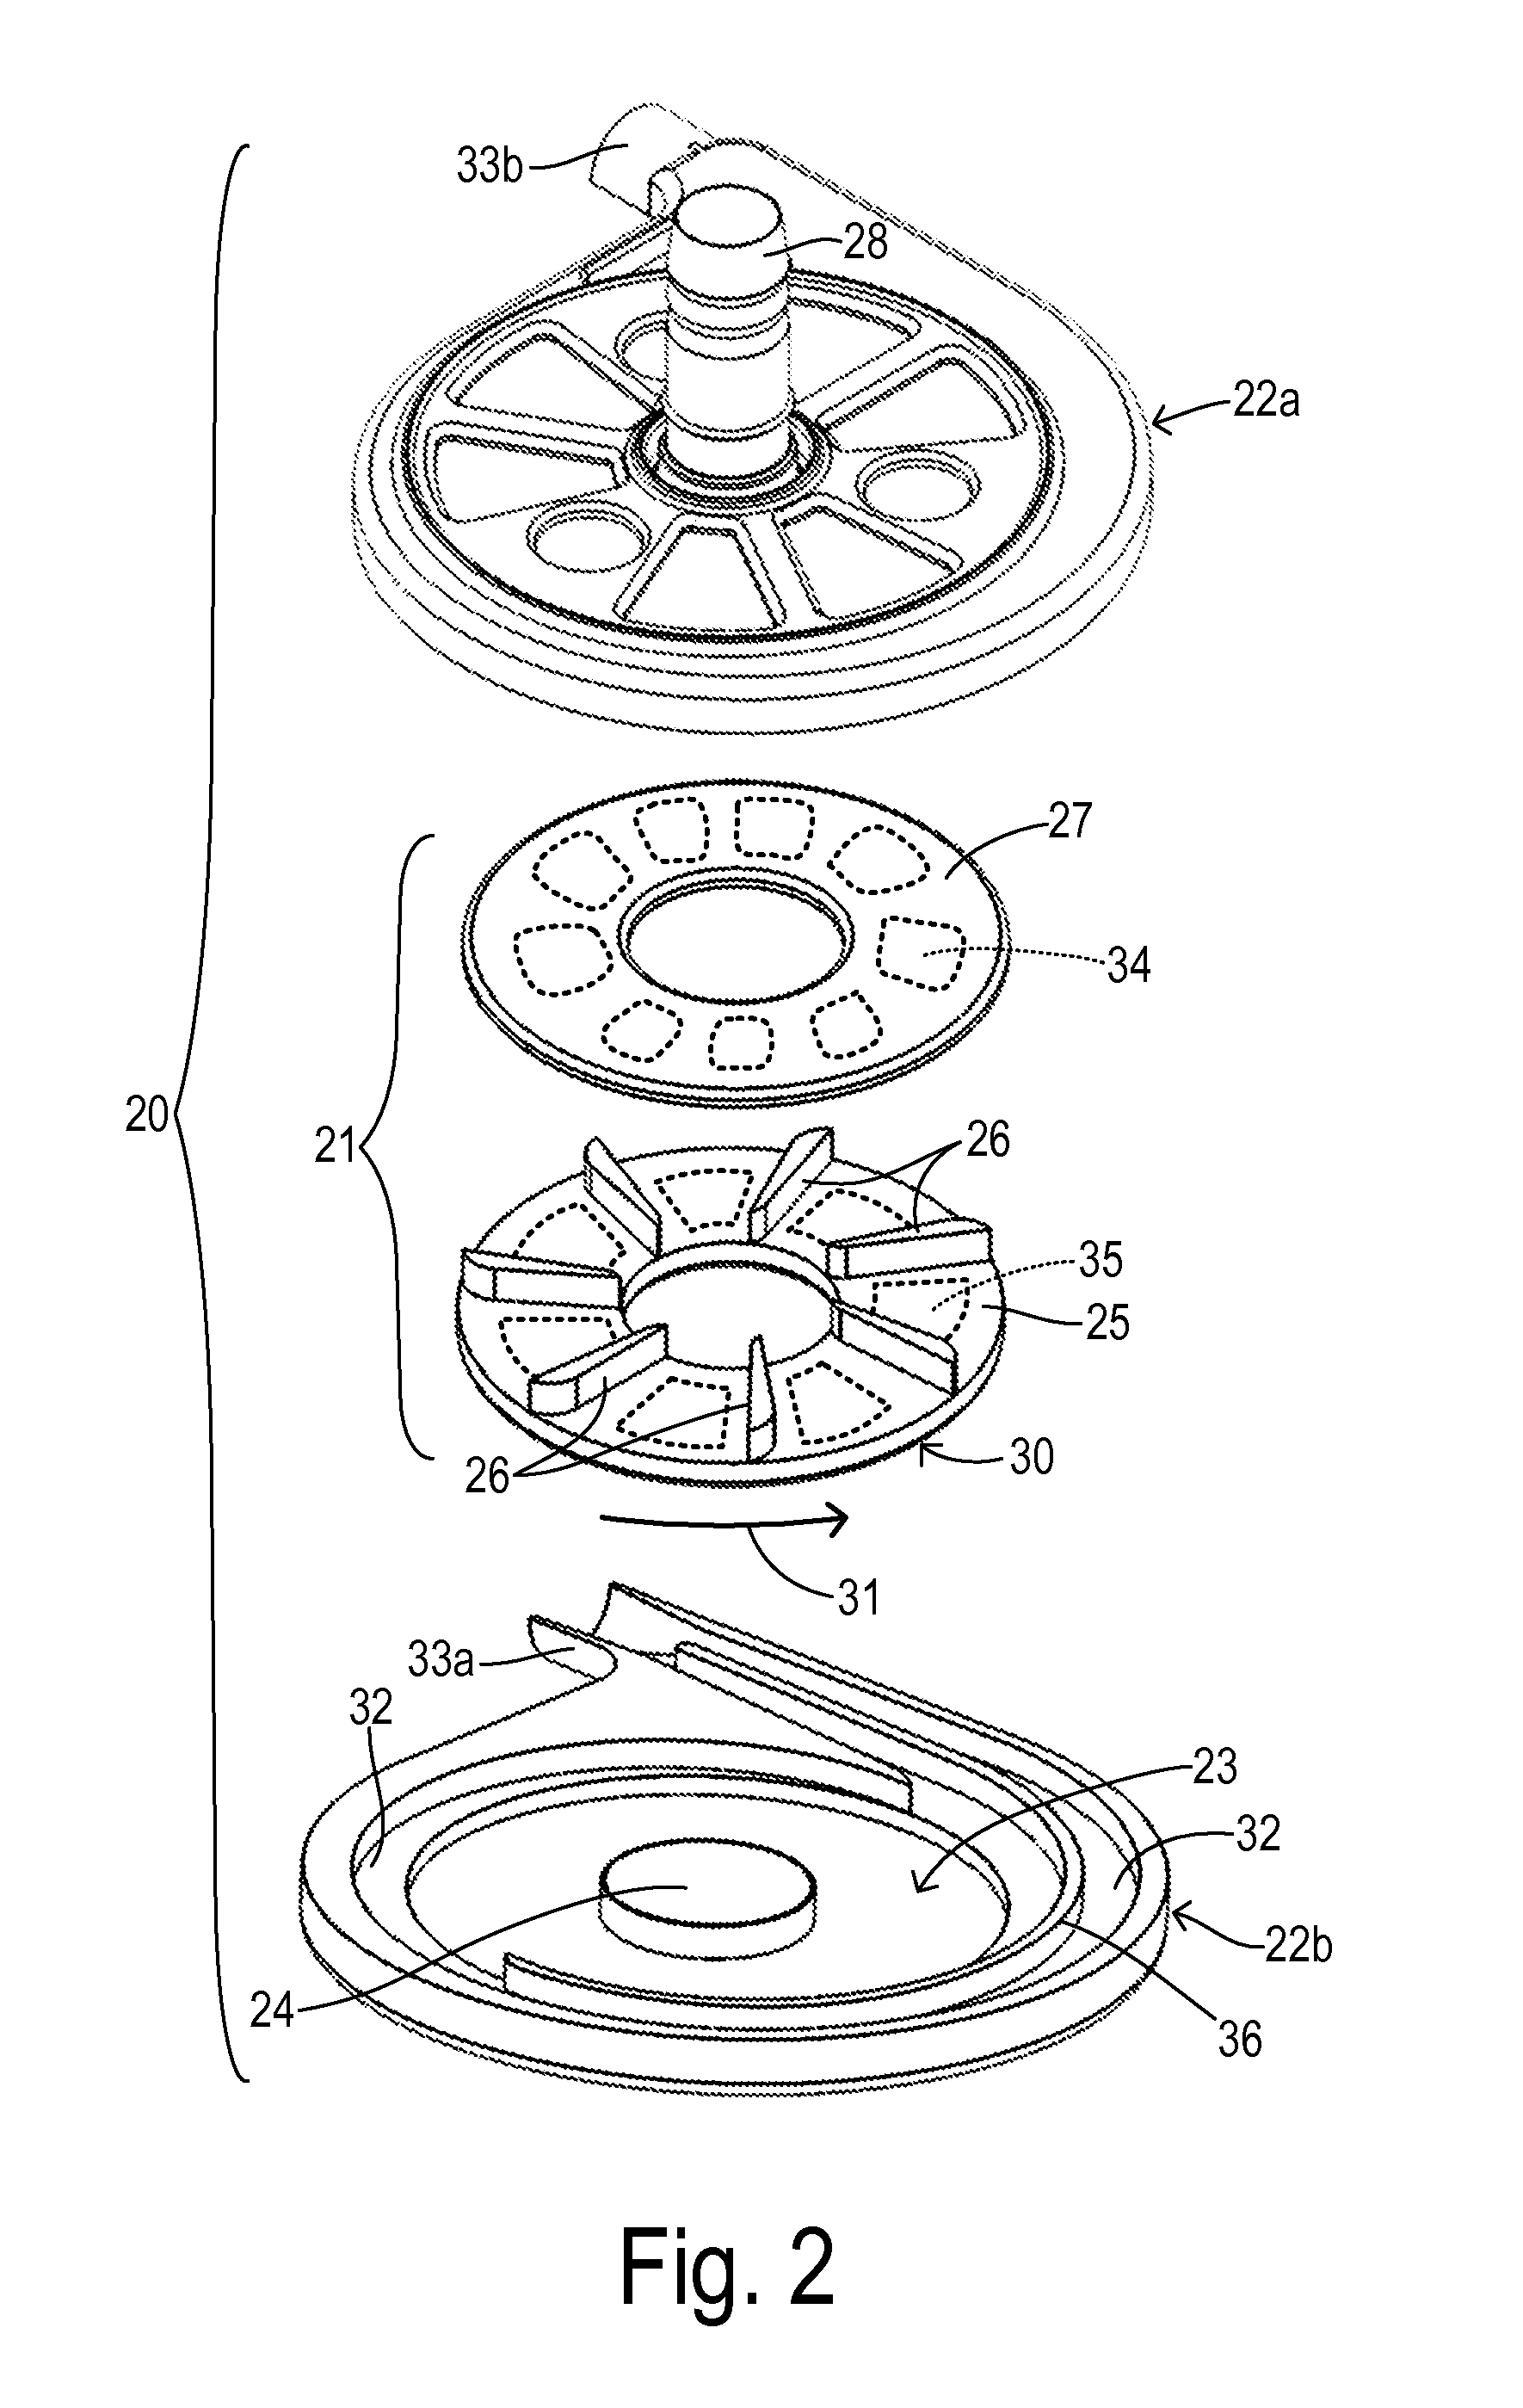 Cardiac pump with speed adapted for ventricle unloading